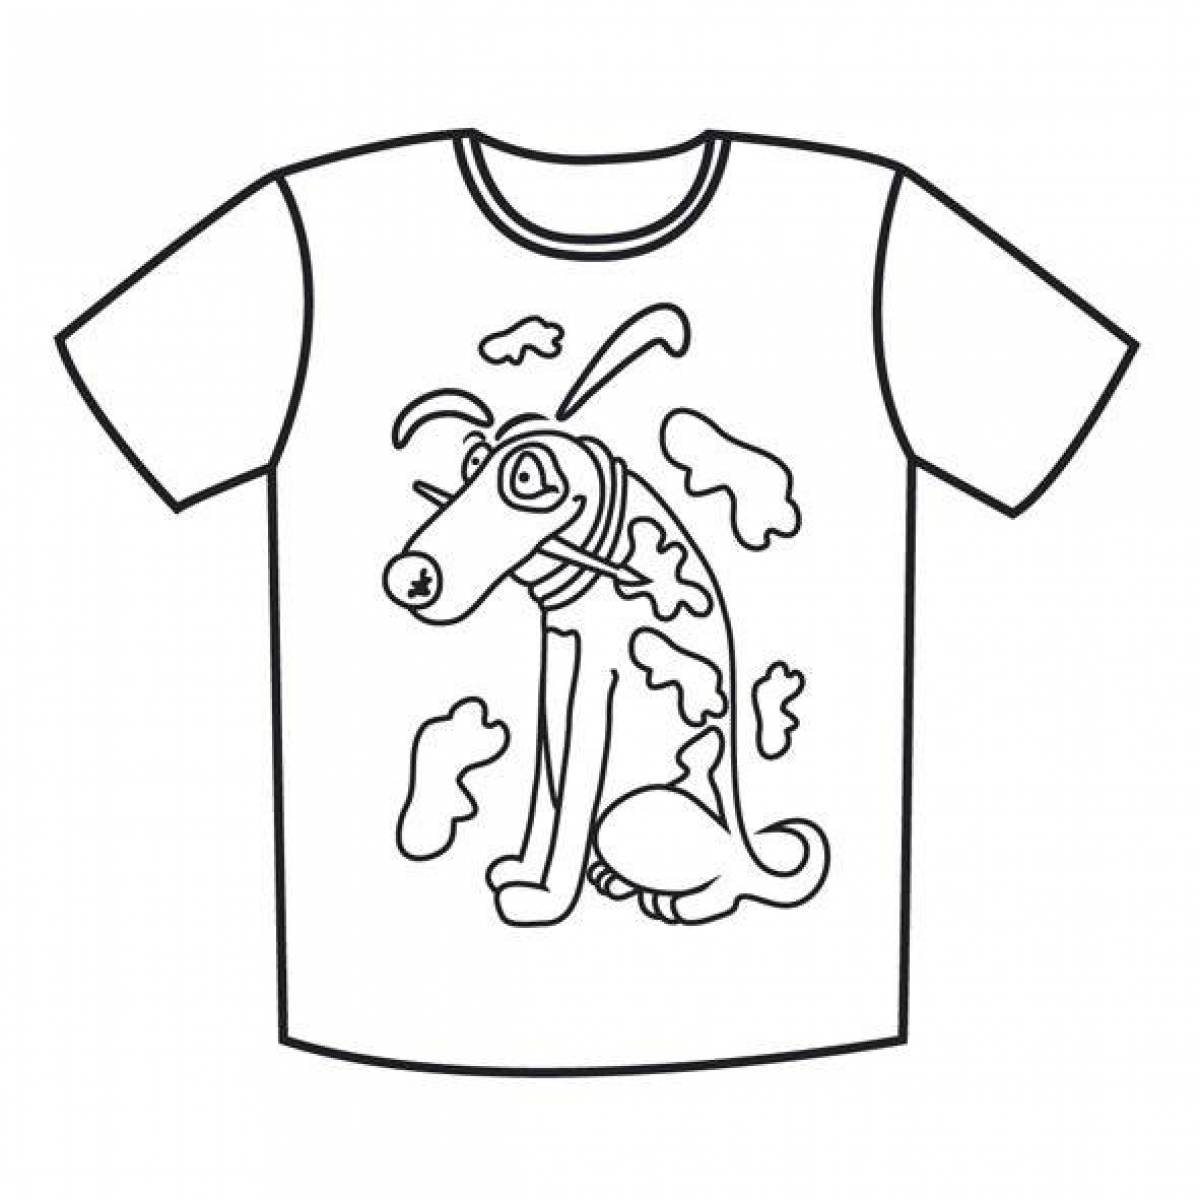 Coloring page with a spectacular t-shirt